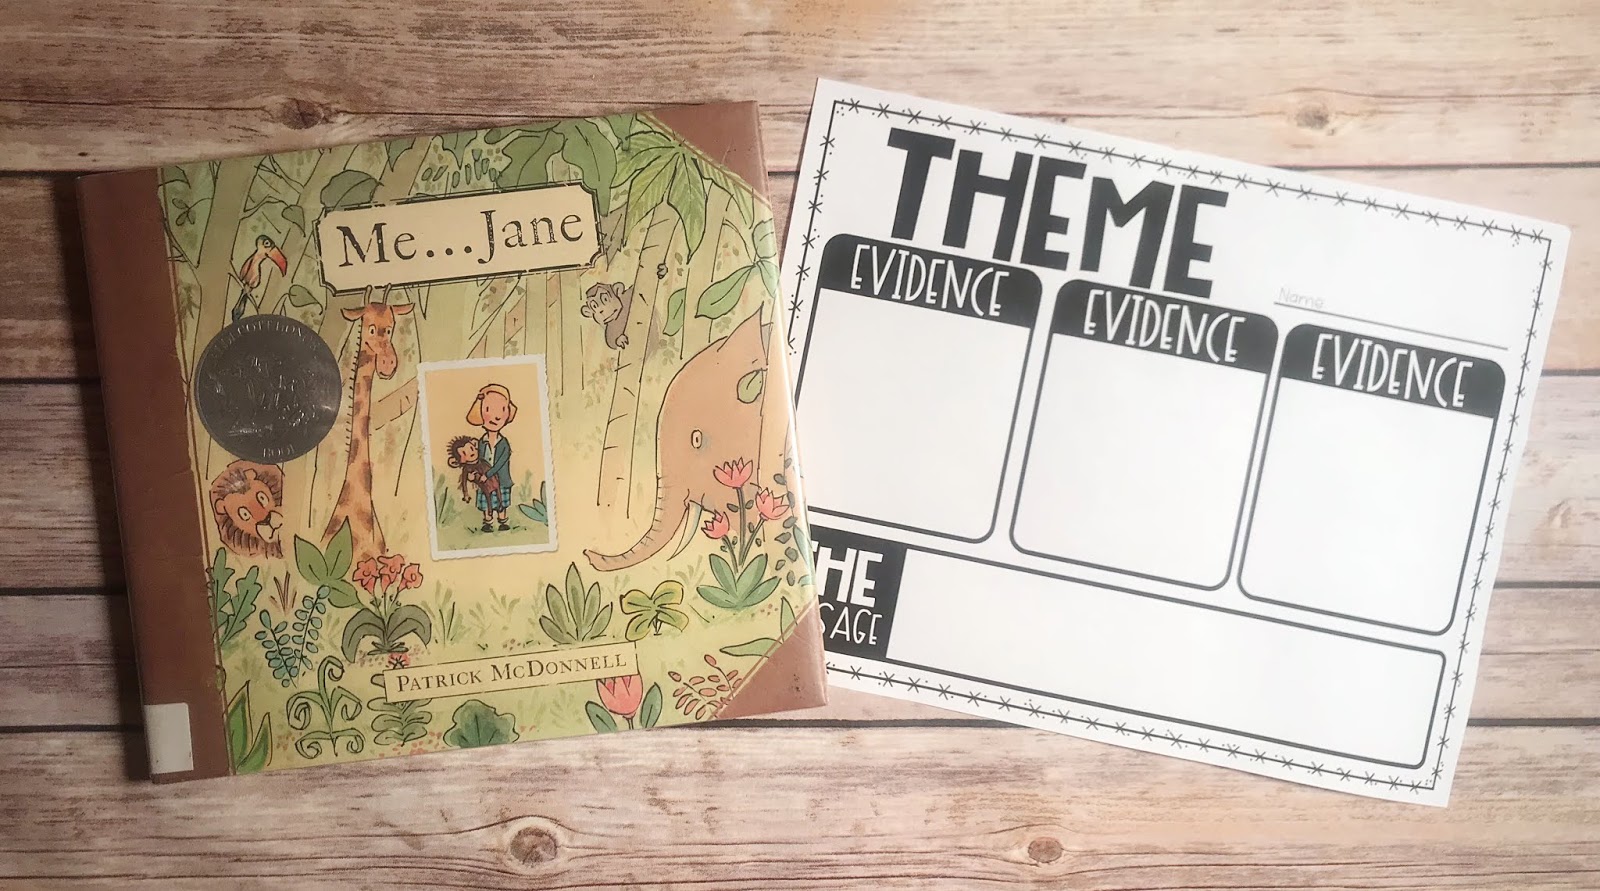 Mentor Text with text "Me...Jane" and Graphic Organizer with text "Theme"